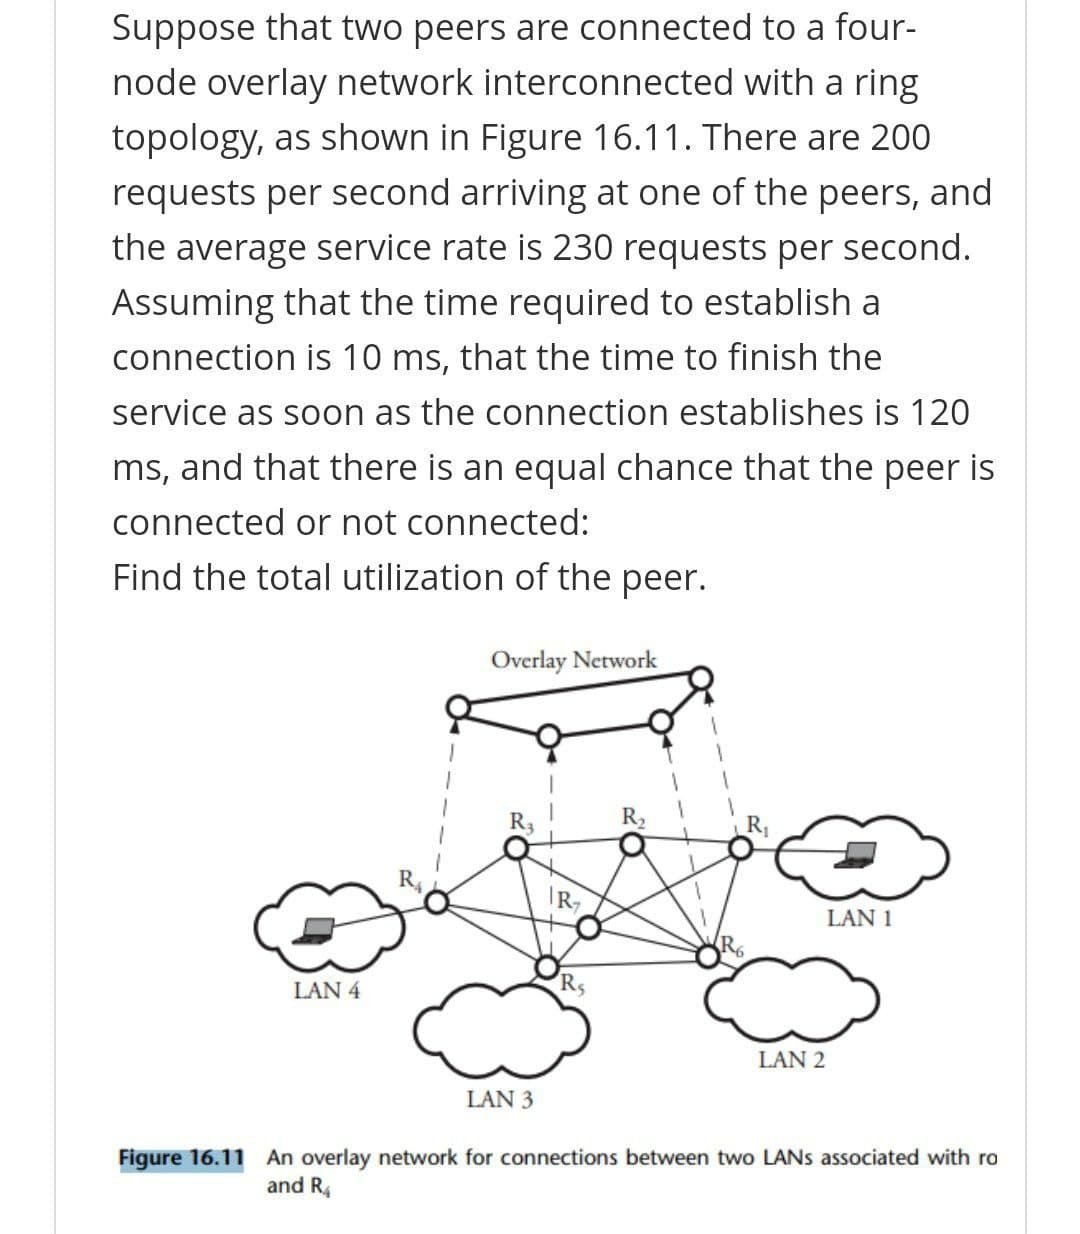 Suppose that two peers are connected to a four-
node overlay network interconnected with a ring
topology, as shown in Figure 16.11. There are 200
requests per second arriving at one of the peers, and
the average service rate is 230 requests per second.
Assuming that the time required to establish a
connection is 10 ms, that the time to finish the
service as soon as the connection establishes is 120
ms, and that there is an equal chance that the peer is
connected or not connected:
Find the total utilization of the peer.
Overlay Network
R3
R
|R7
LAN 1
LAN 4
Rs
LAN 2
LAN 3
Figure 16.11 An overlay network for connections between two LANS associated with ro
and R4
